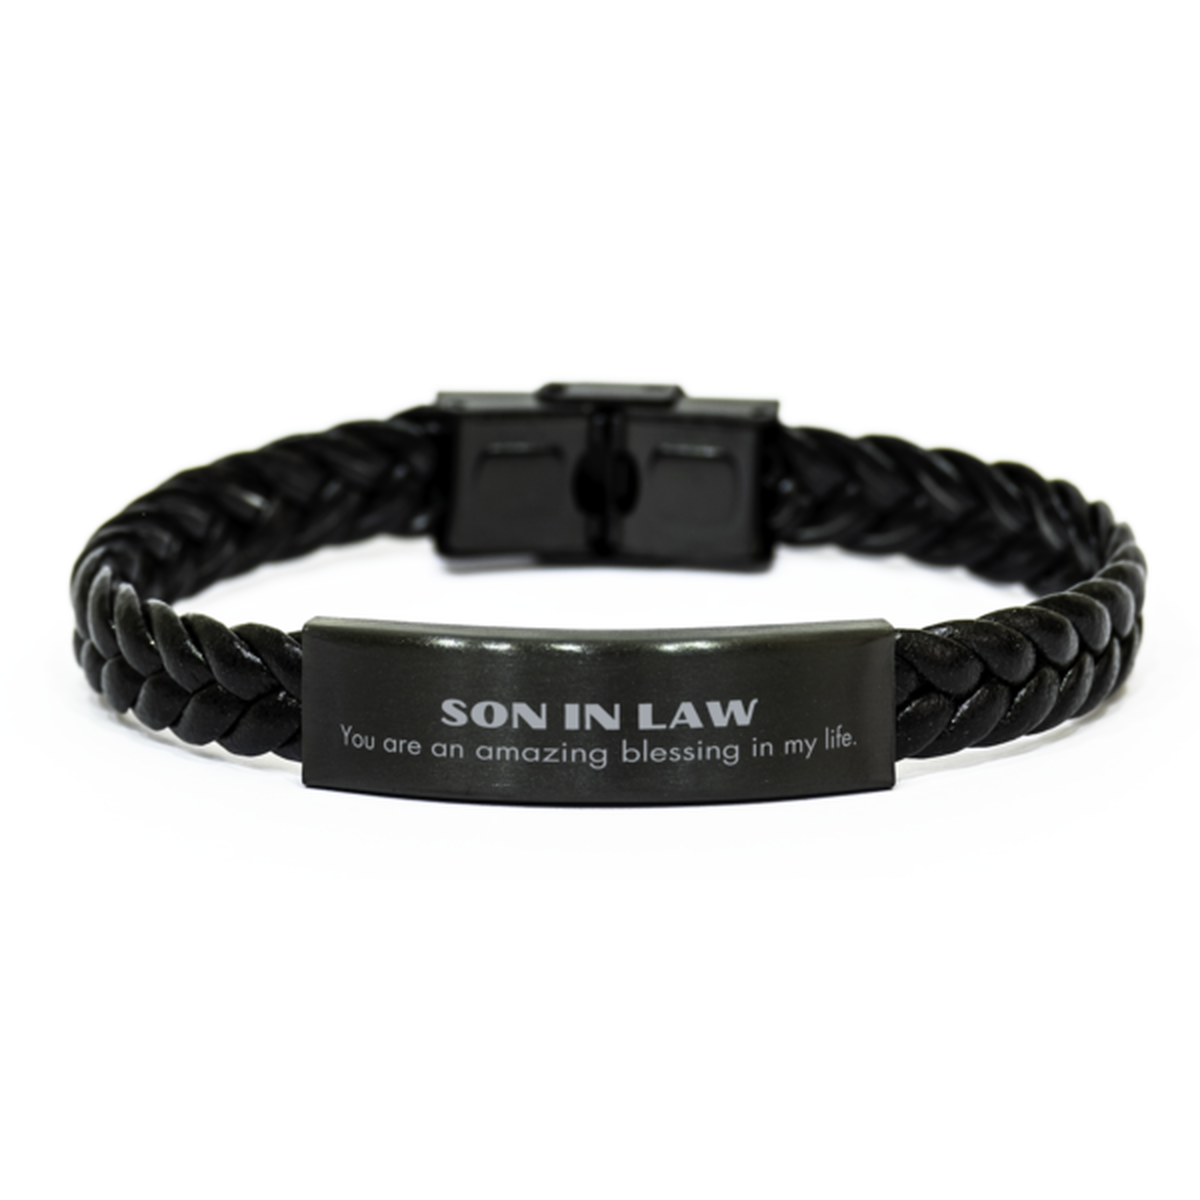 Son In Law Braided Leather Bracelet, You are an amazing blessing in my life, Thank You Gifts For Son In Law, Inspirational Birthday Christmas Unique Gifts For Son In Law